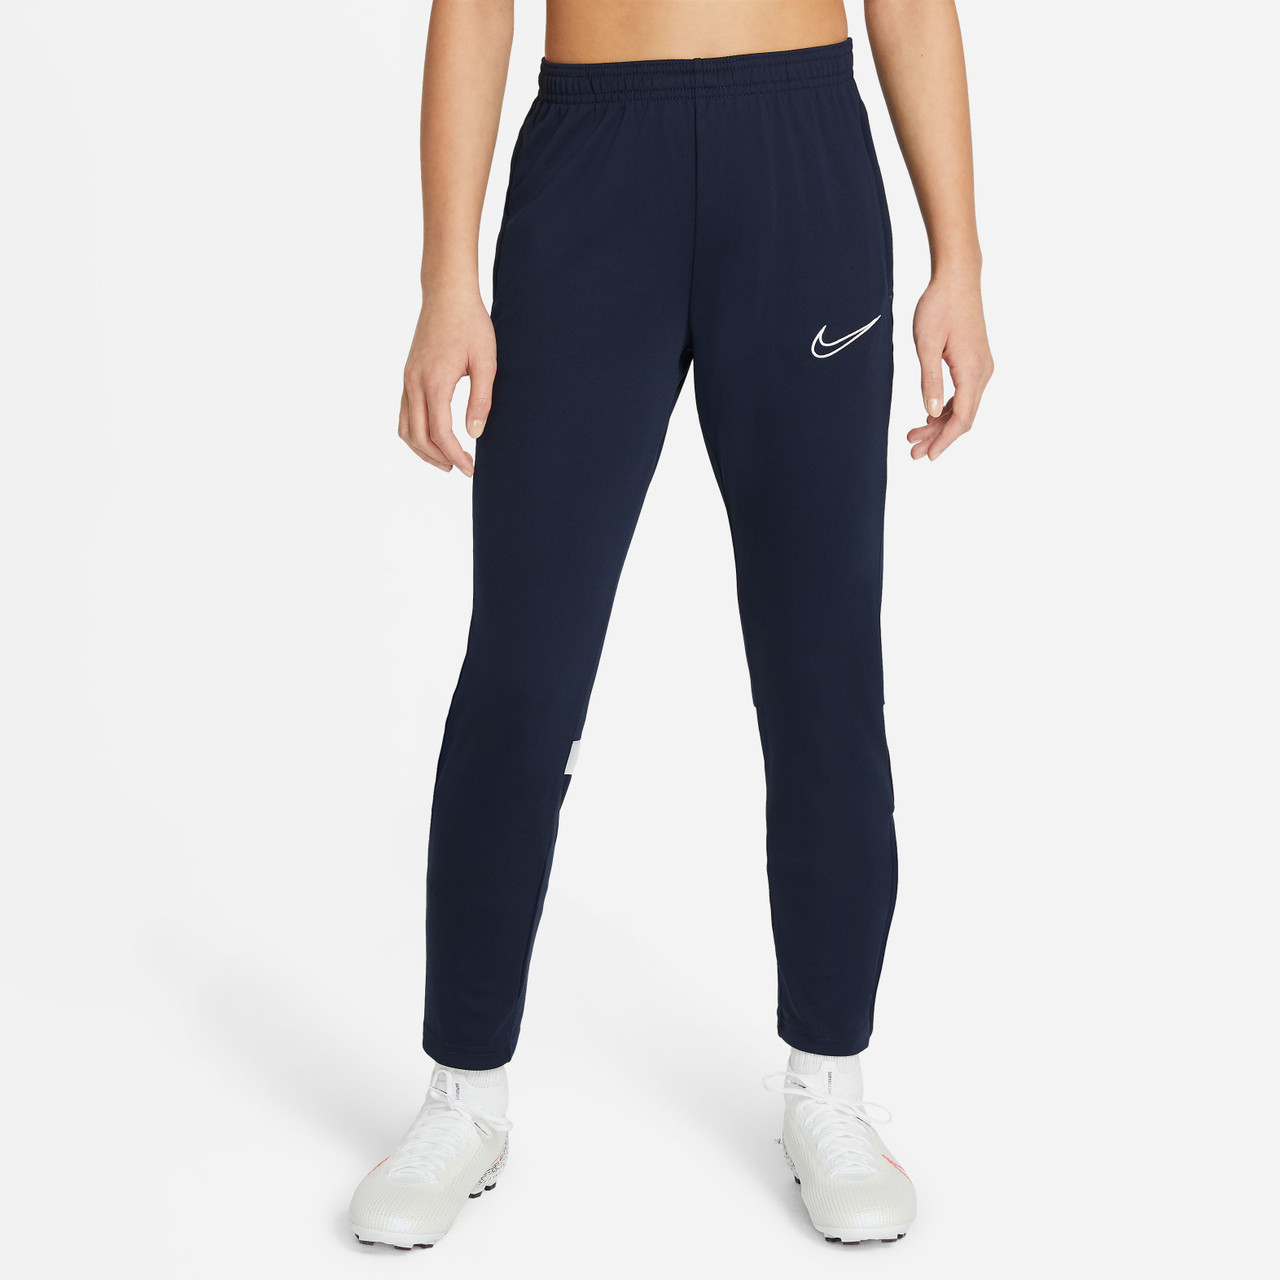 Patatas Hospitalidad sabio Nike Dri-FIT Academy Soccer Pants Youth Version 451-Blue-White - Chicago  Soccer